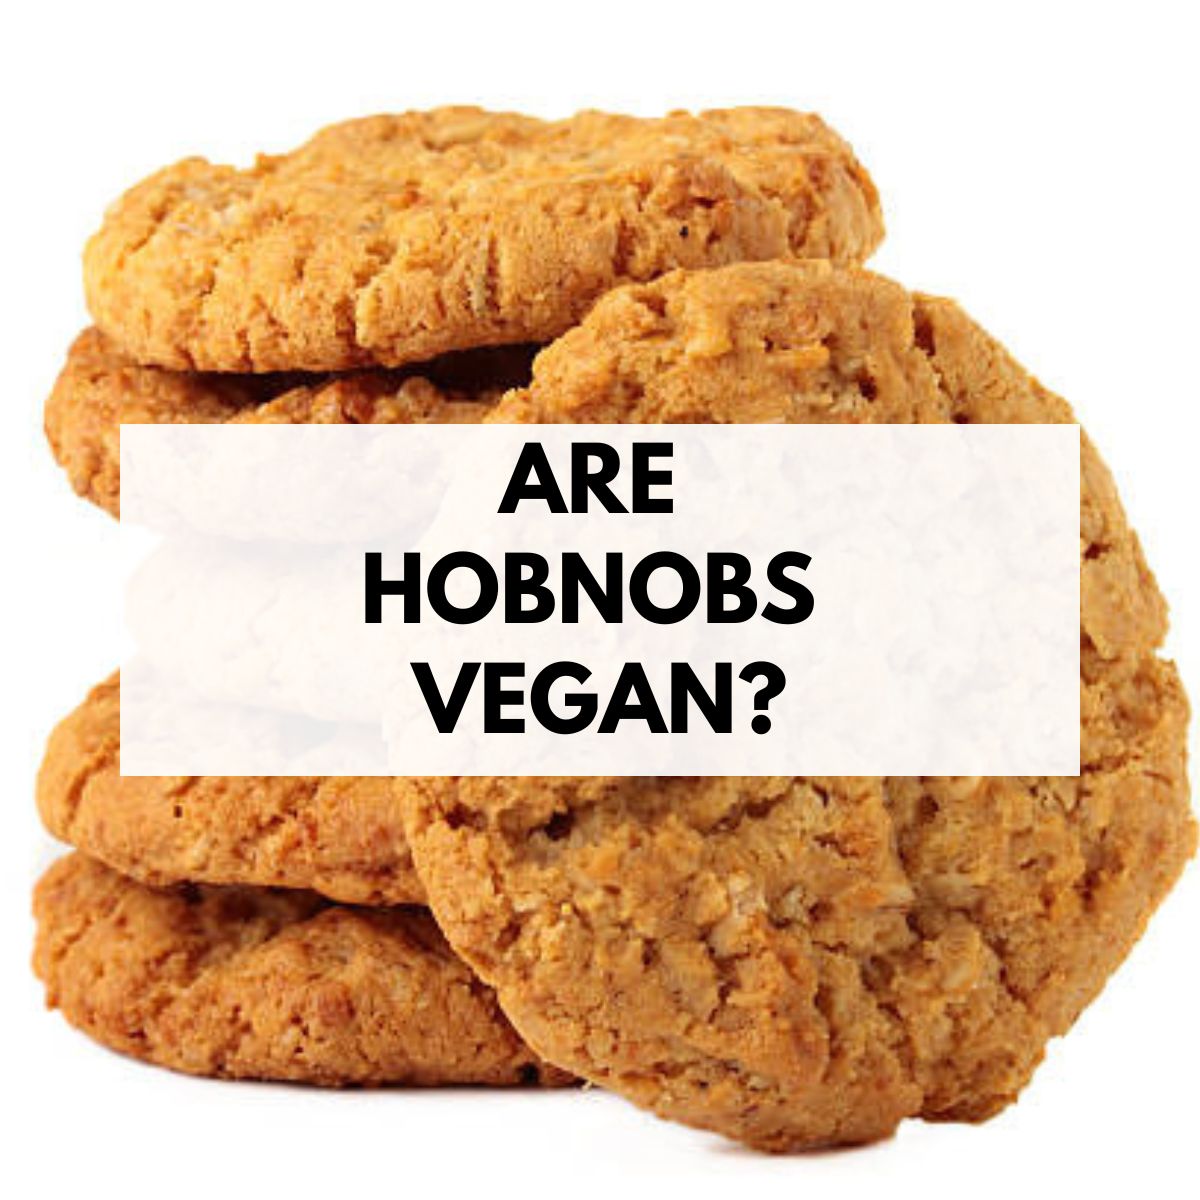 Are Hobnobs Vegan Image Of Biscuits With Text Overlay